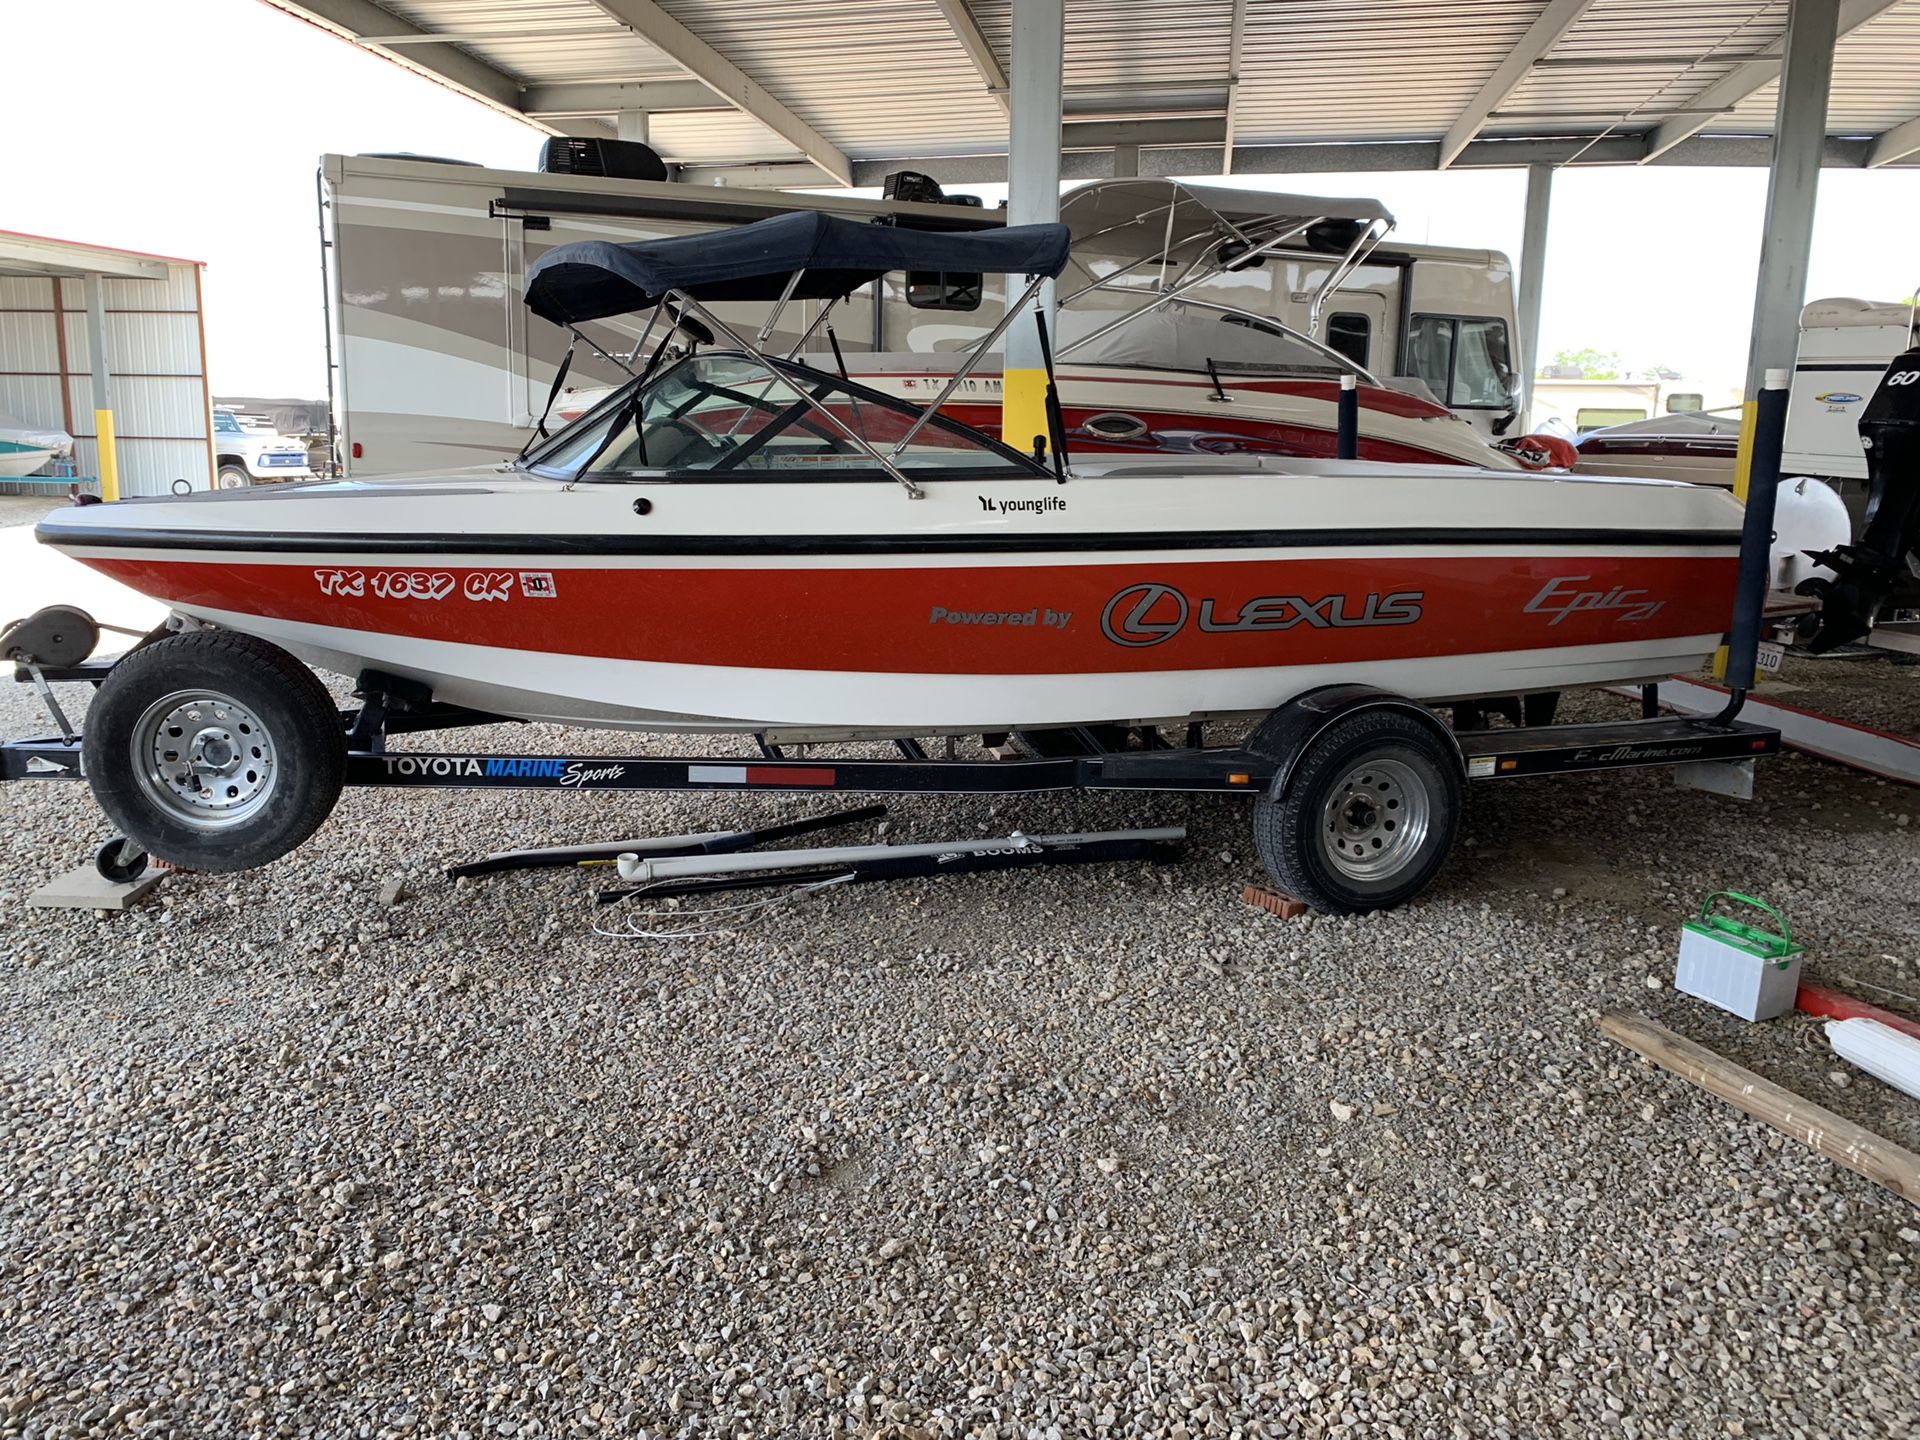 21 ft Toyota ski boat 300 horsepower excellent condition